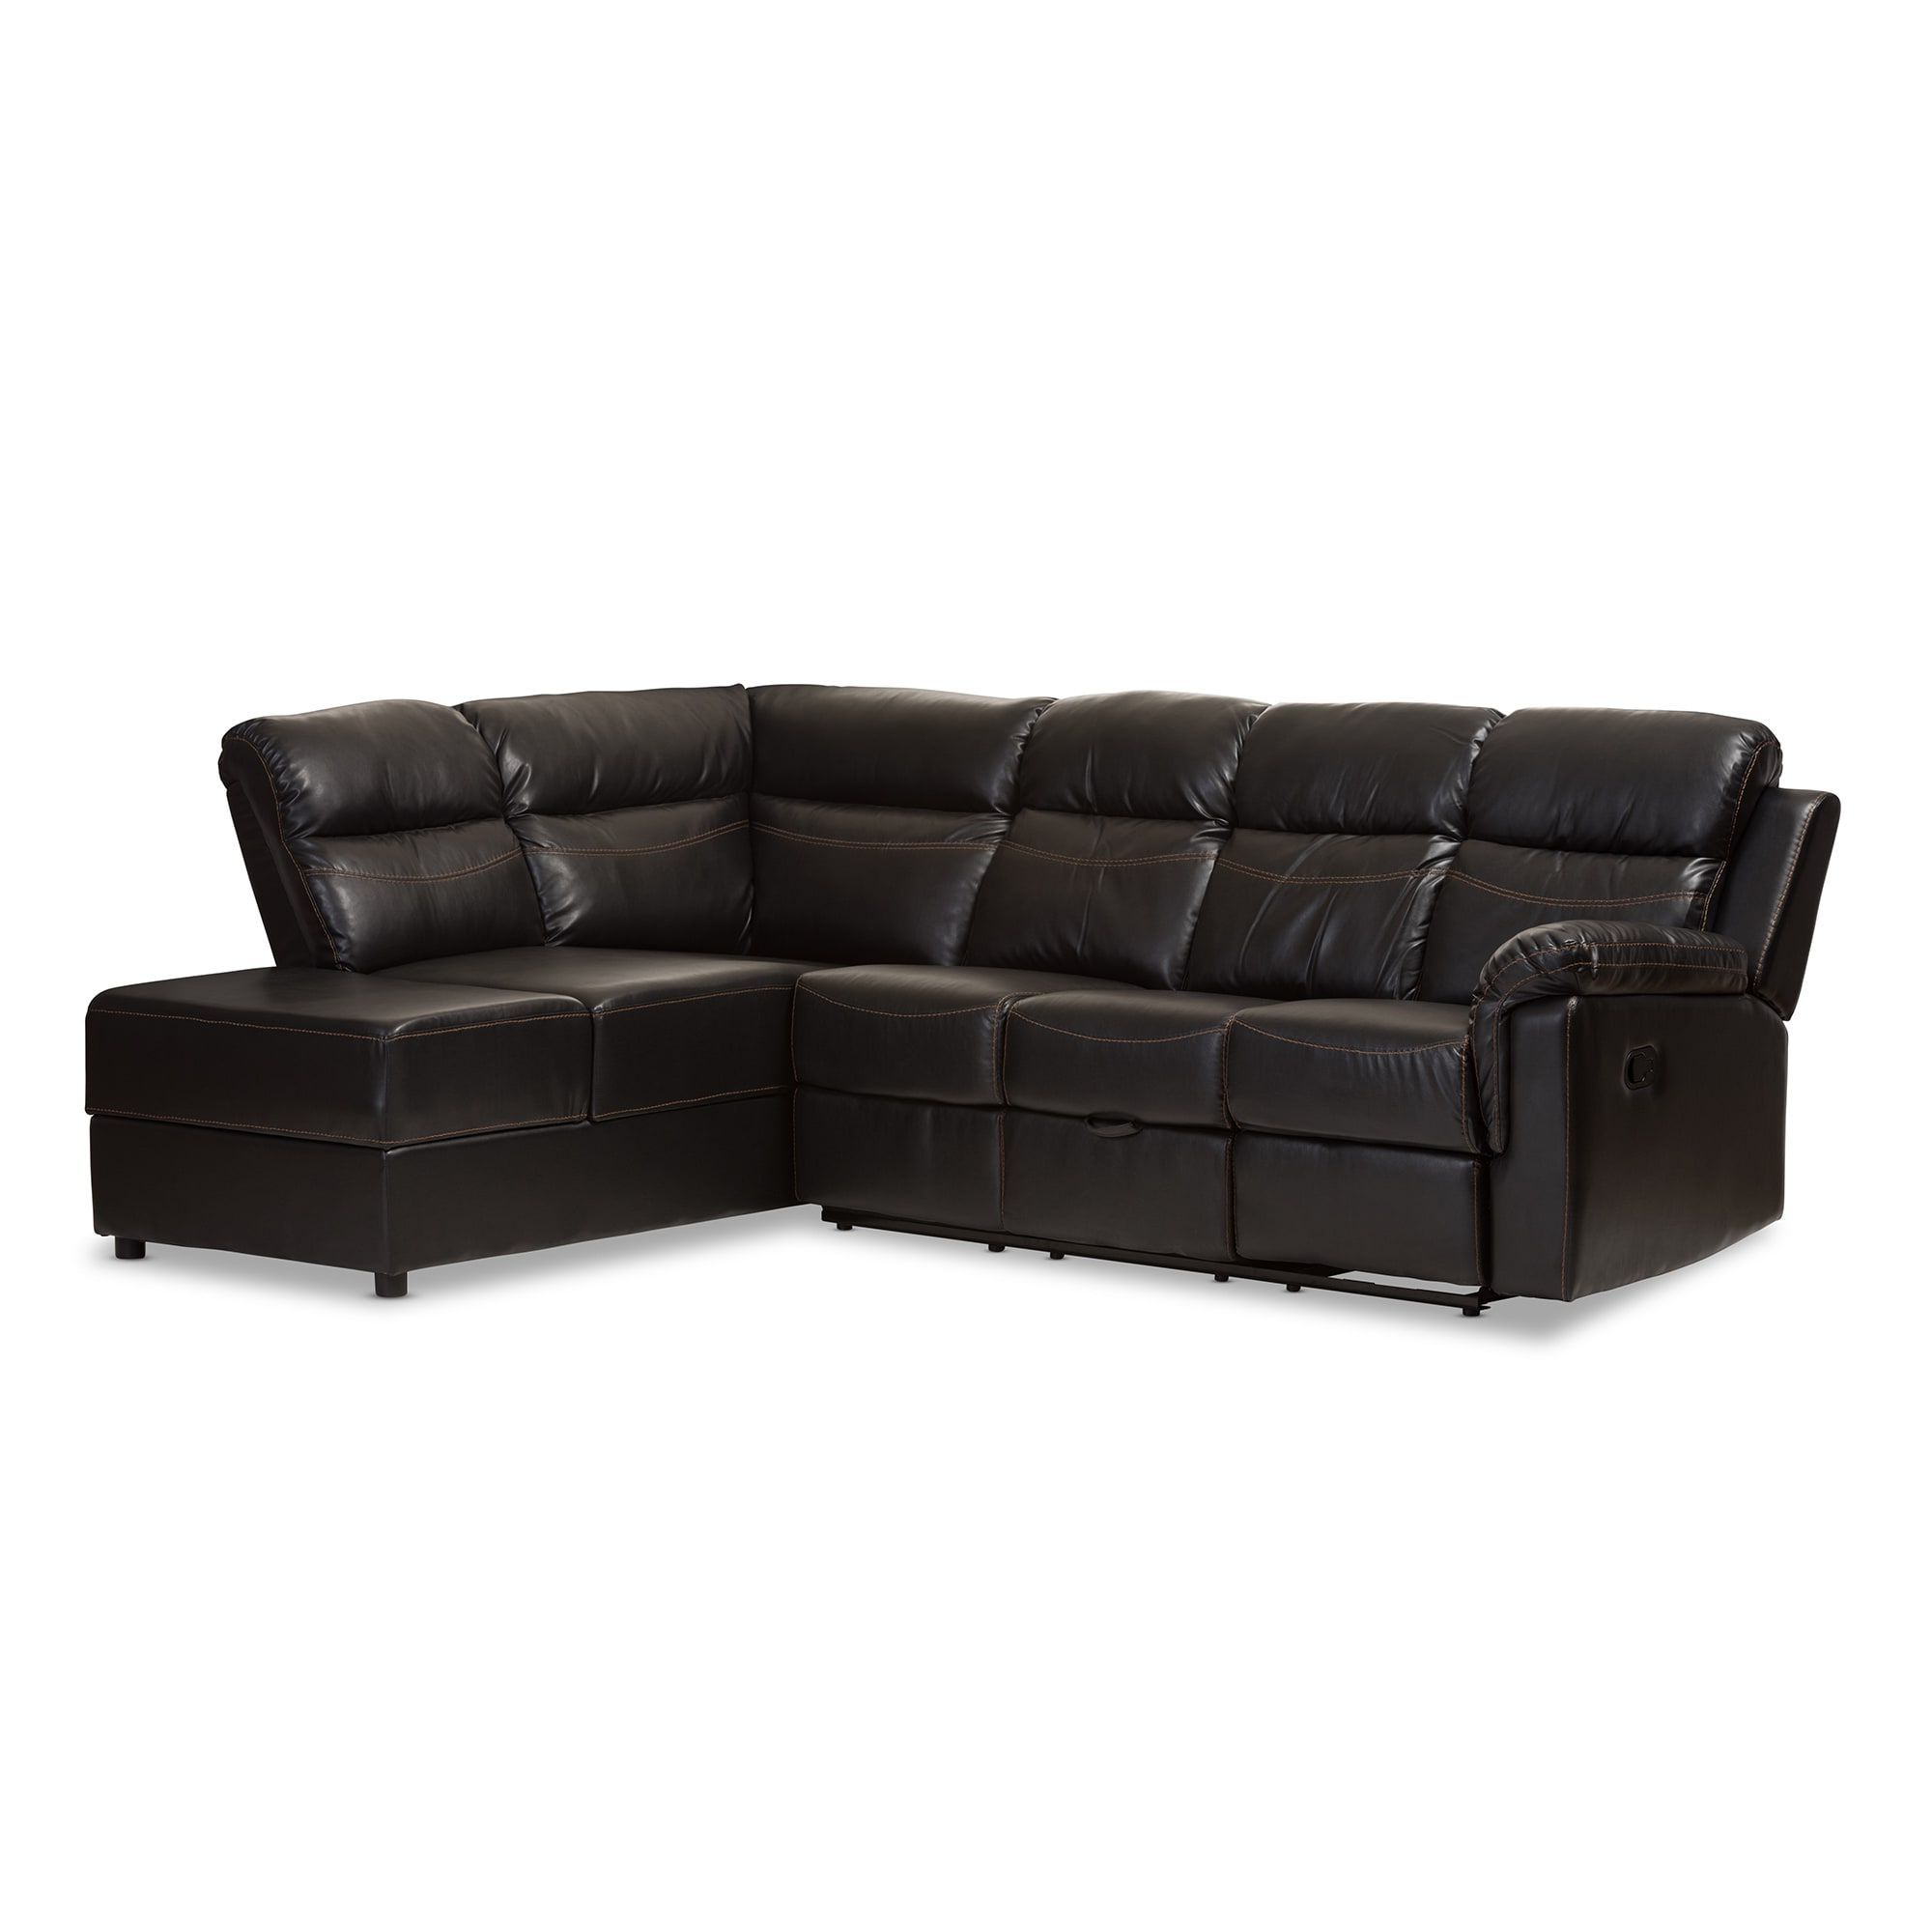 Storage Chaise With Most Current 2pc Burland Contemporary Sectional Sofas Charcoal (View 7 of 25)